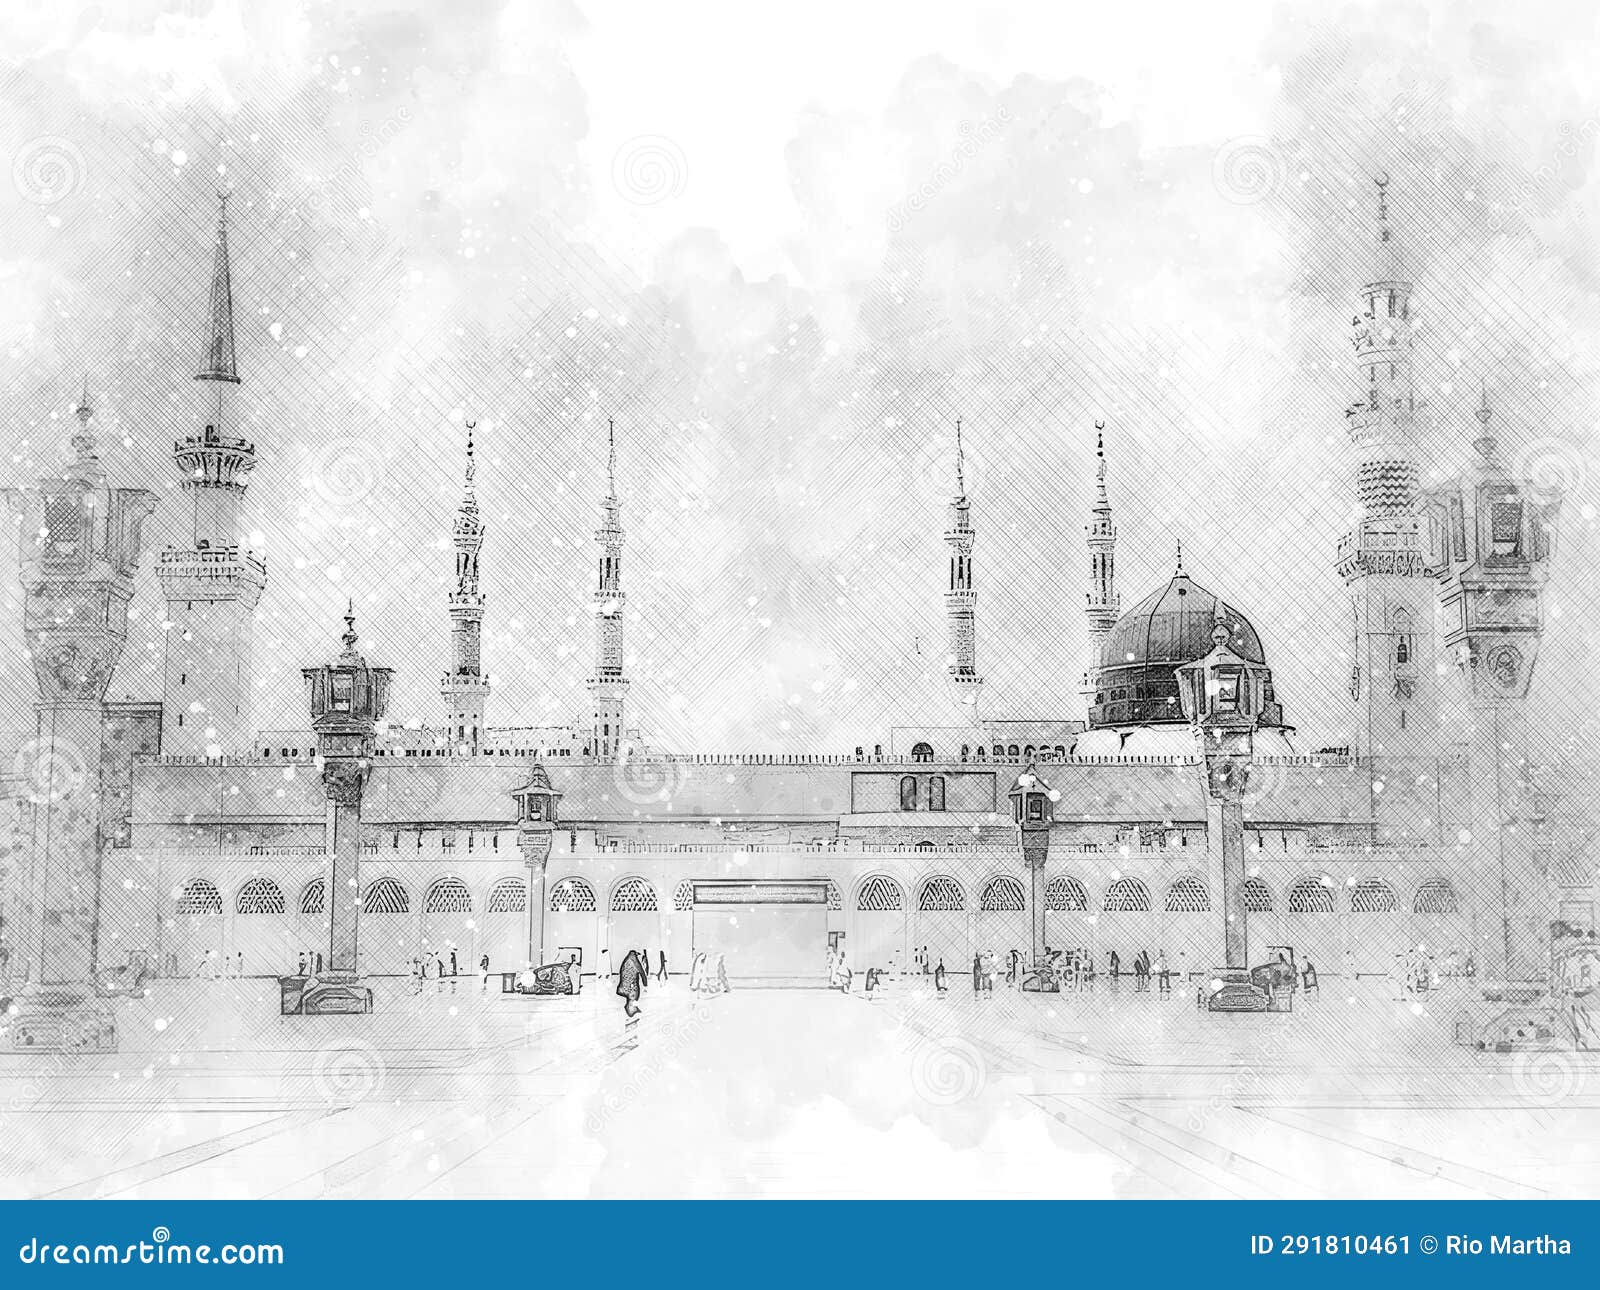 watercolor painting sketch black and white of a green mosque with a green dome, prophet mosque in medina, saudi arabia